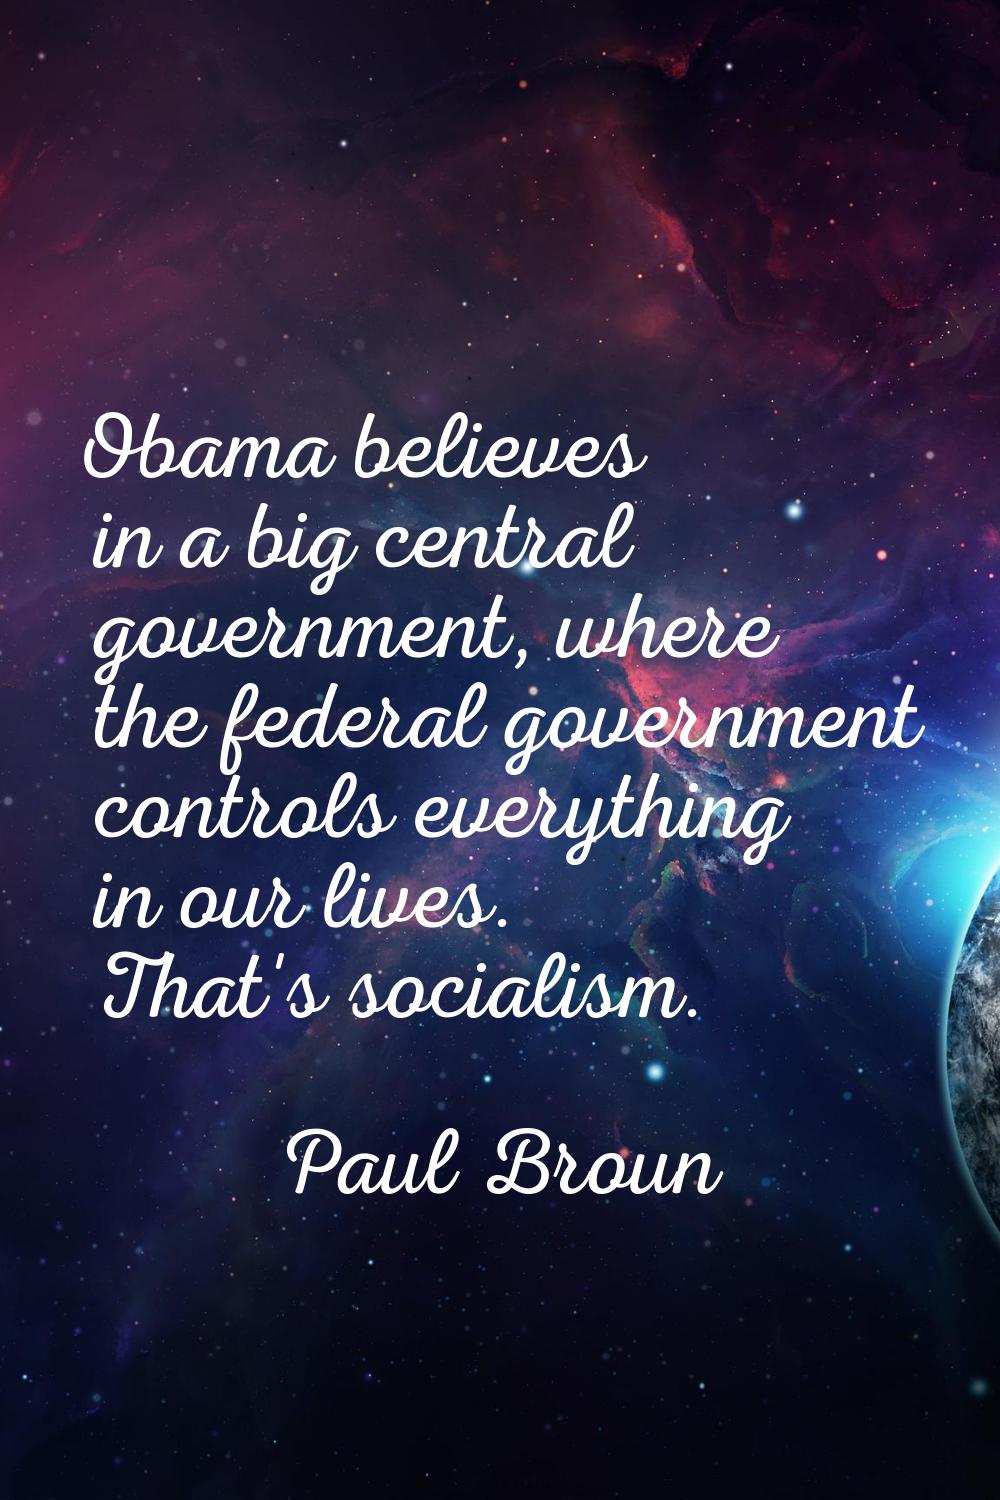 Obama believes in a big central government, where the federal government controls everything in our